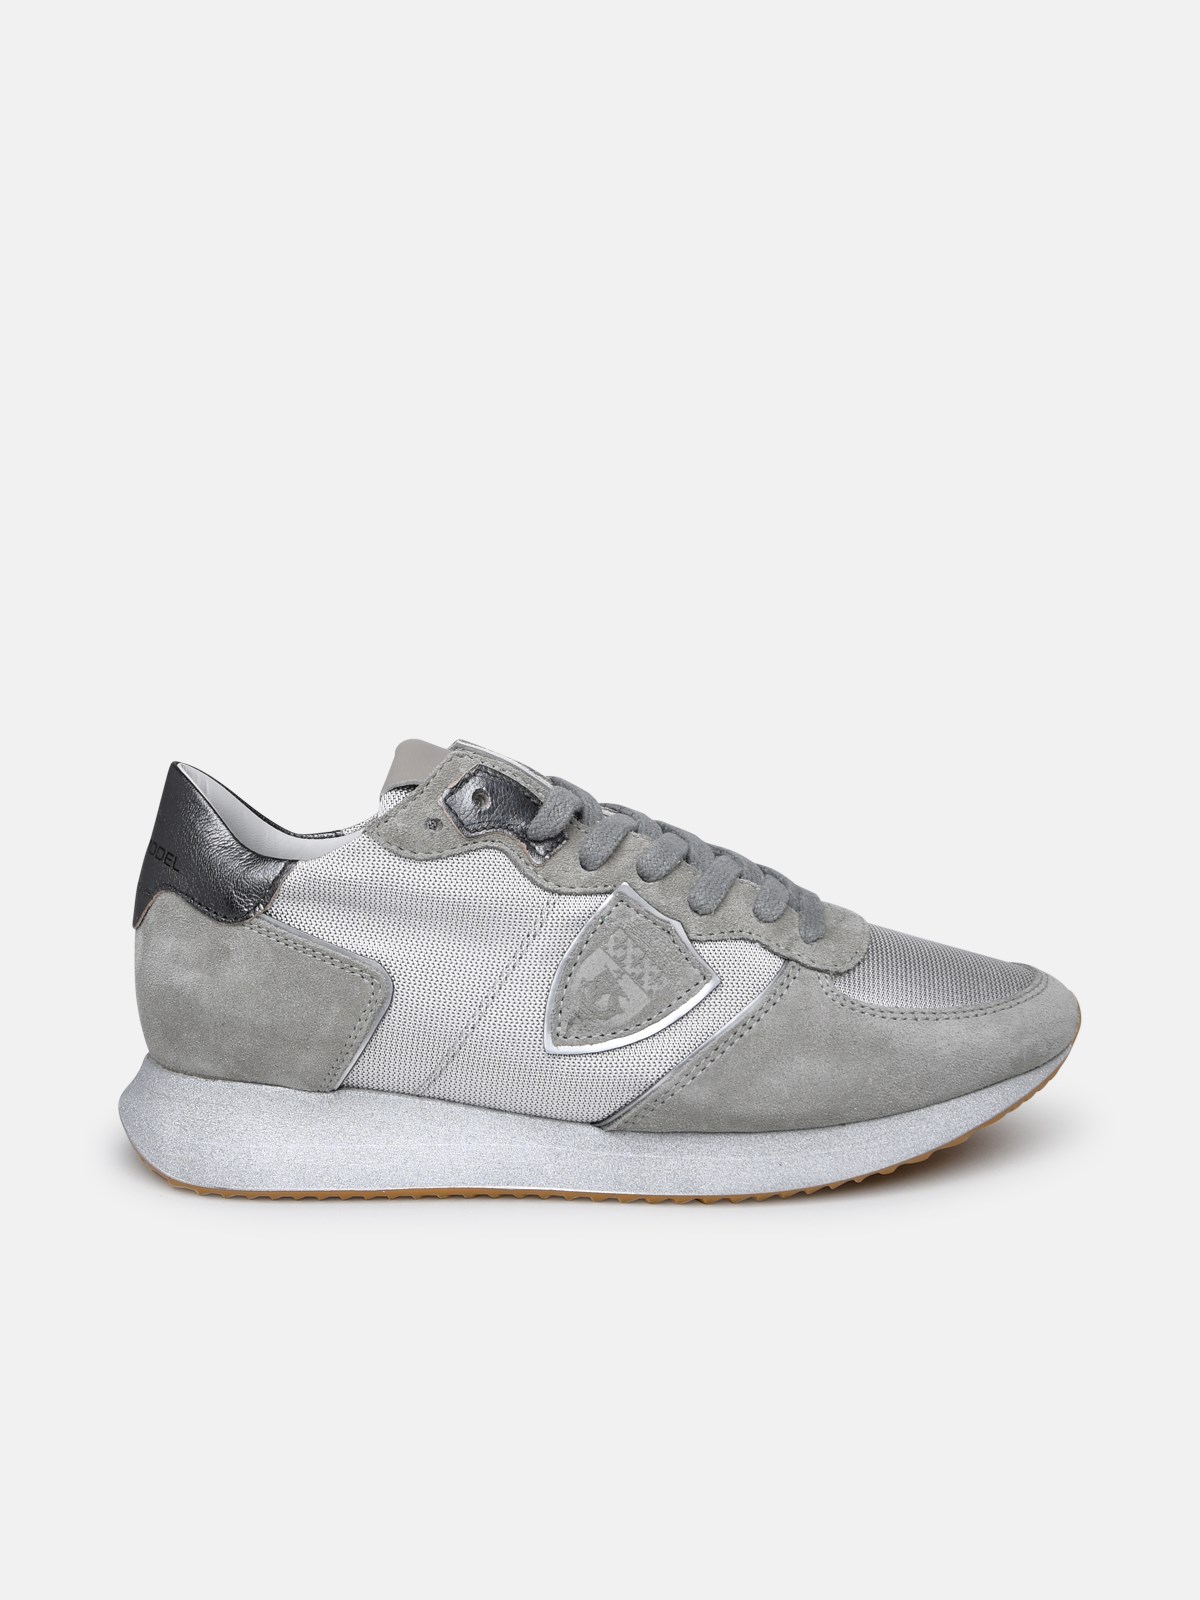 Philippe Model Trpx Sneakers In Grey Technical Fabric Blend In Silver